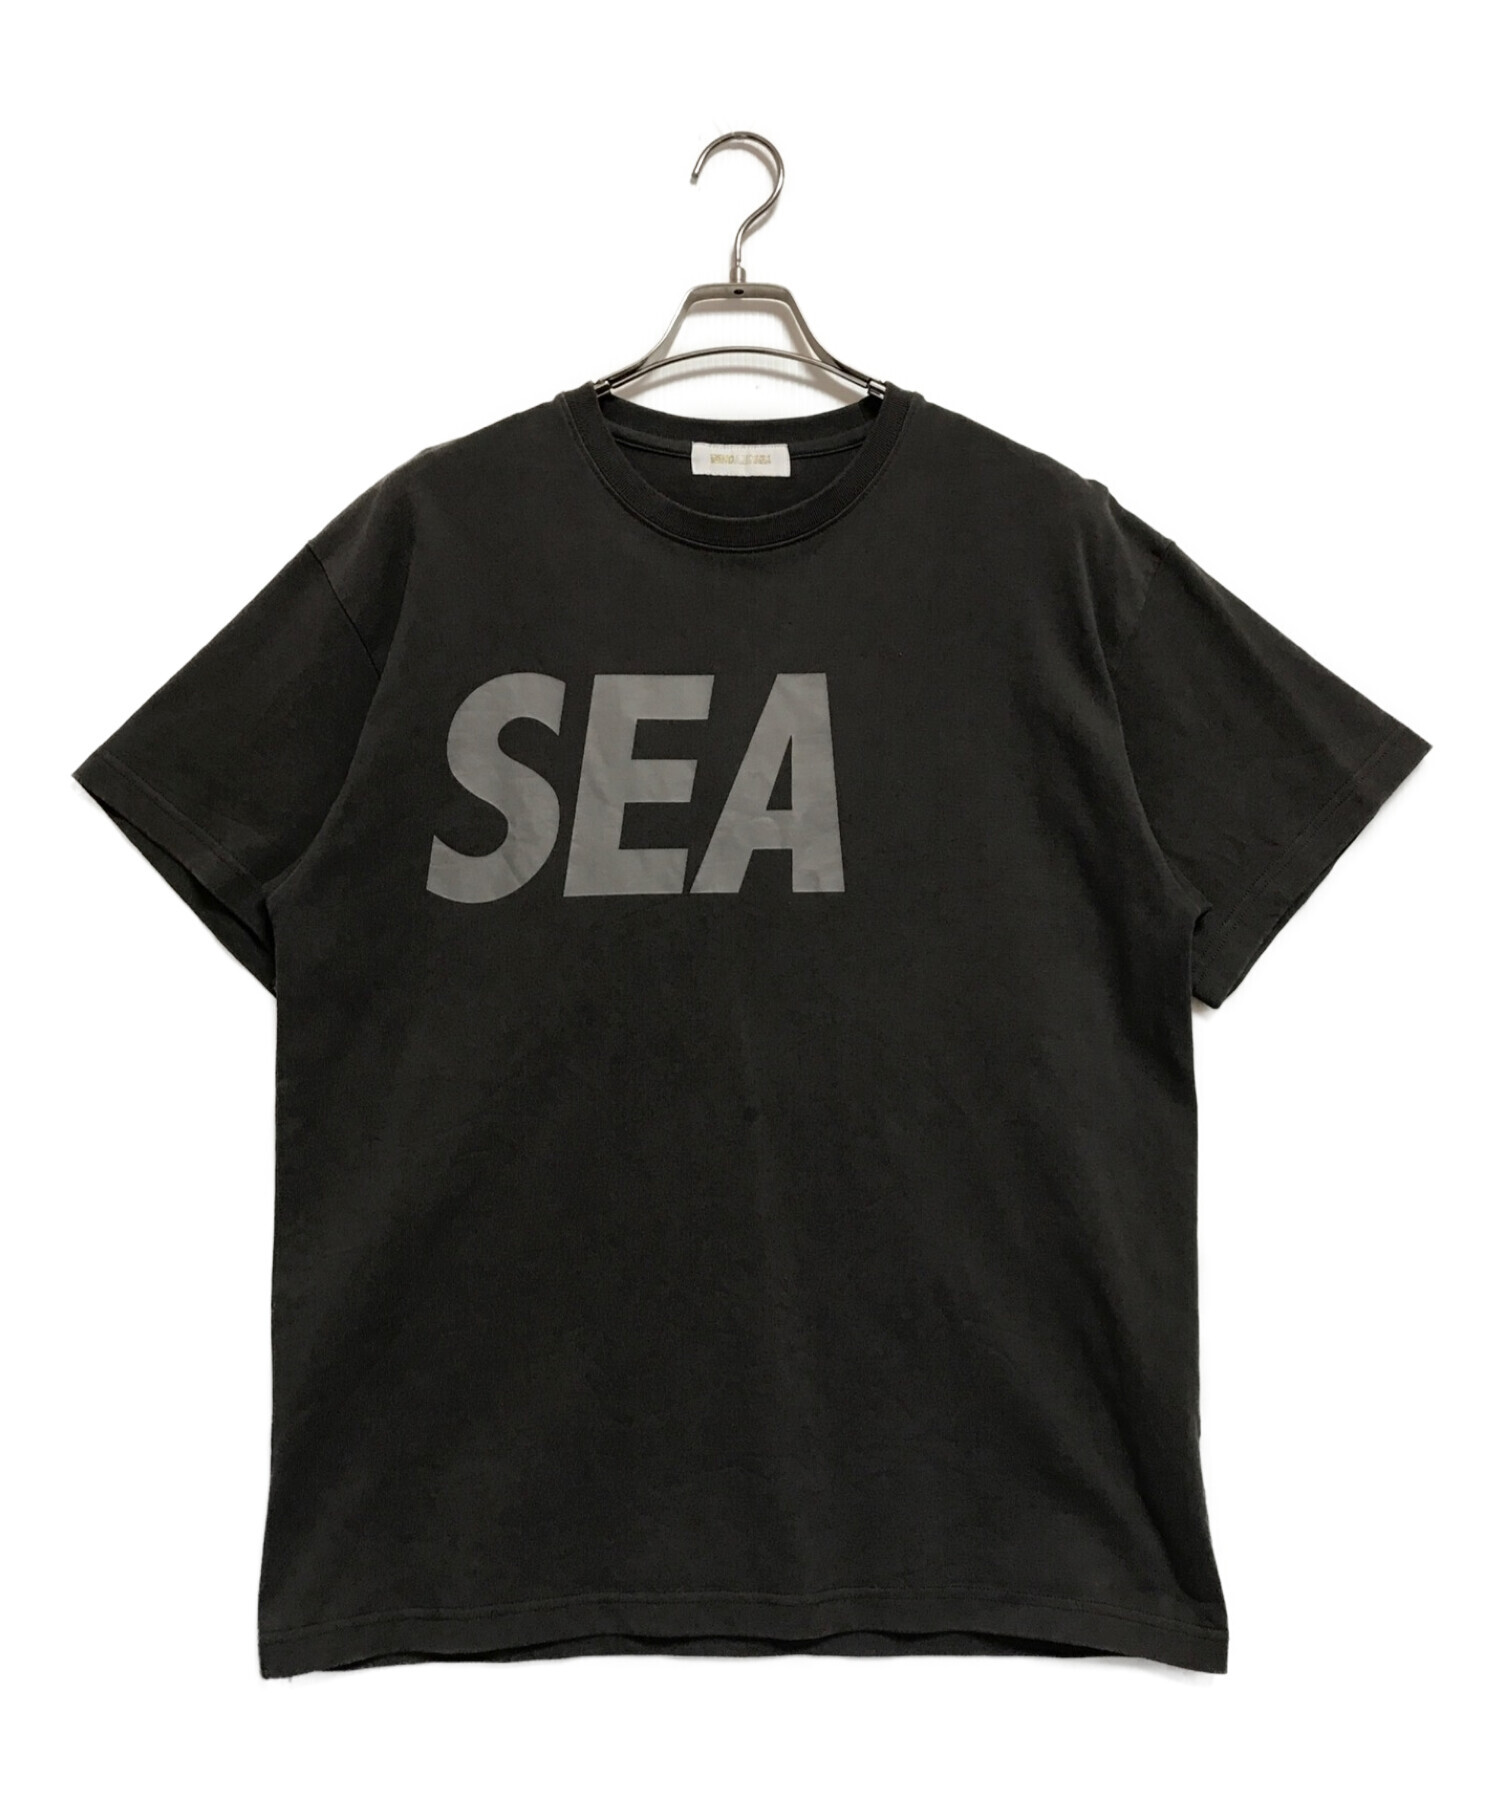 WIND AND SEA (iridescent) T-SHIRT M